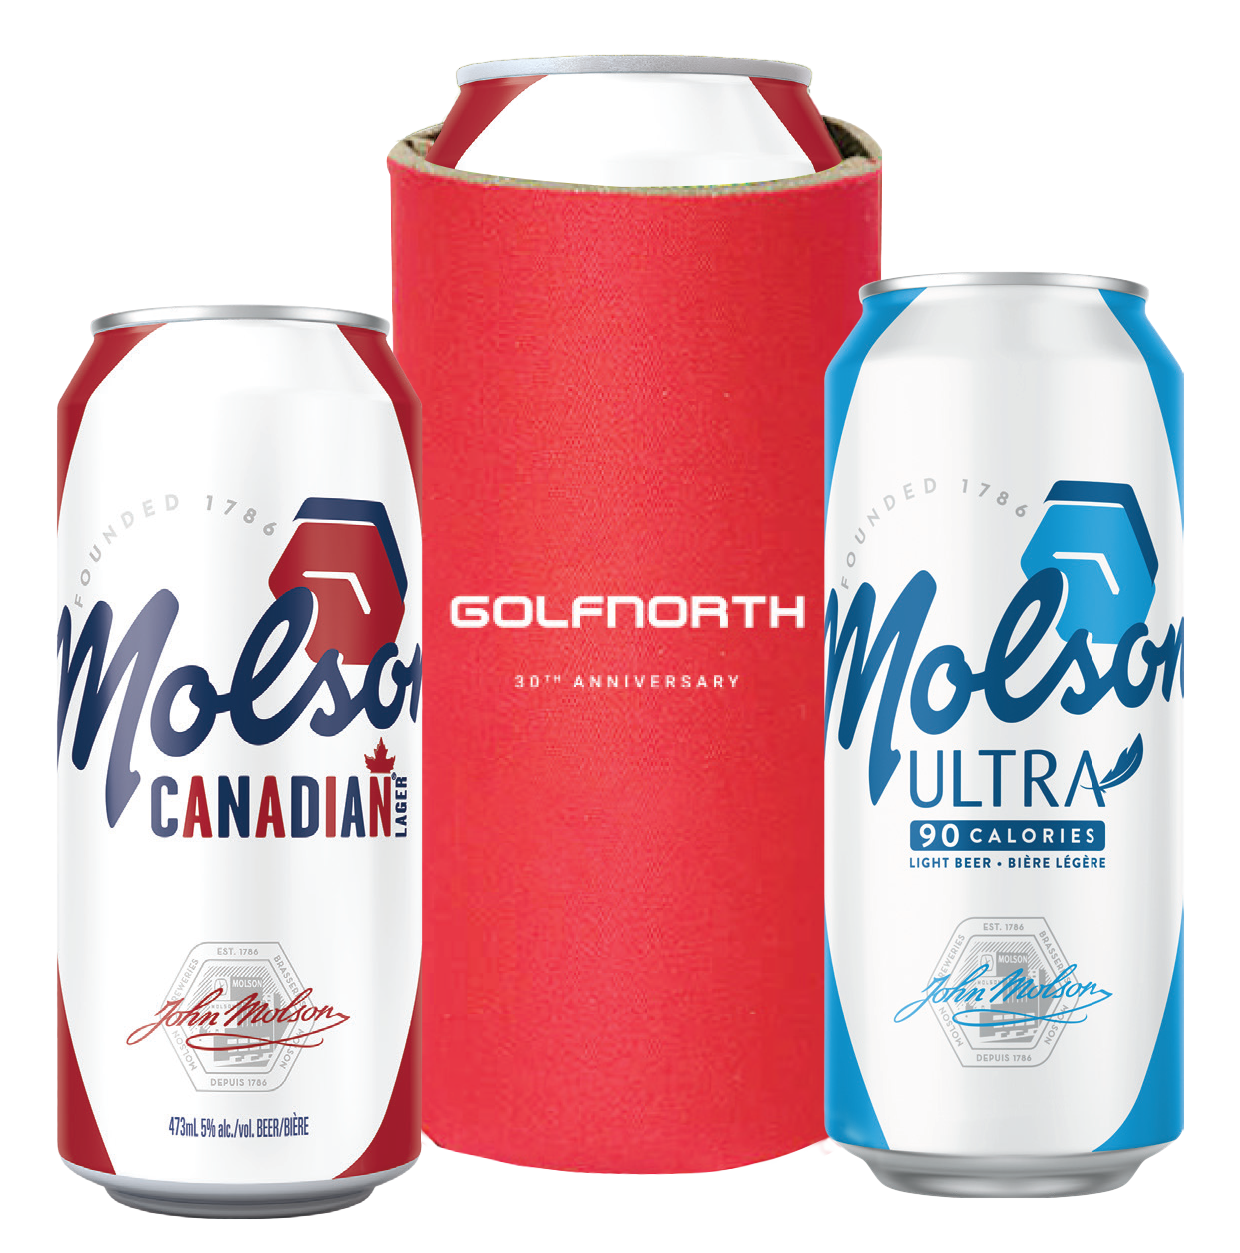 Purchase any Molson™ product and receive a complimentary beer koozie!